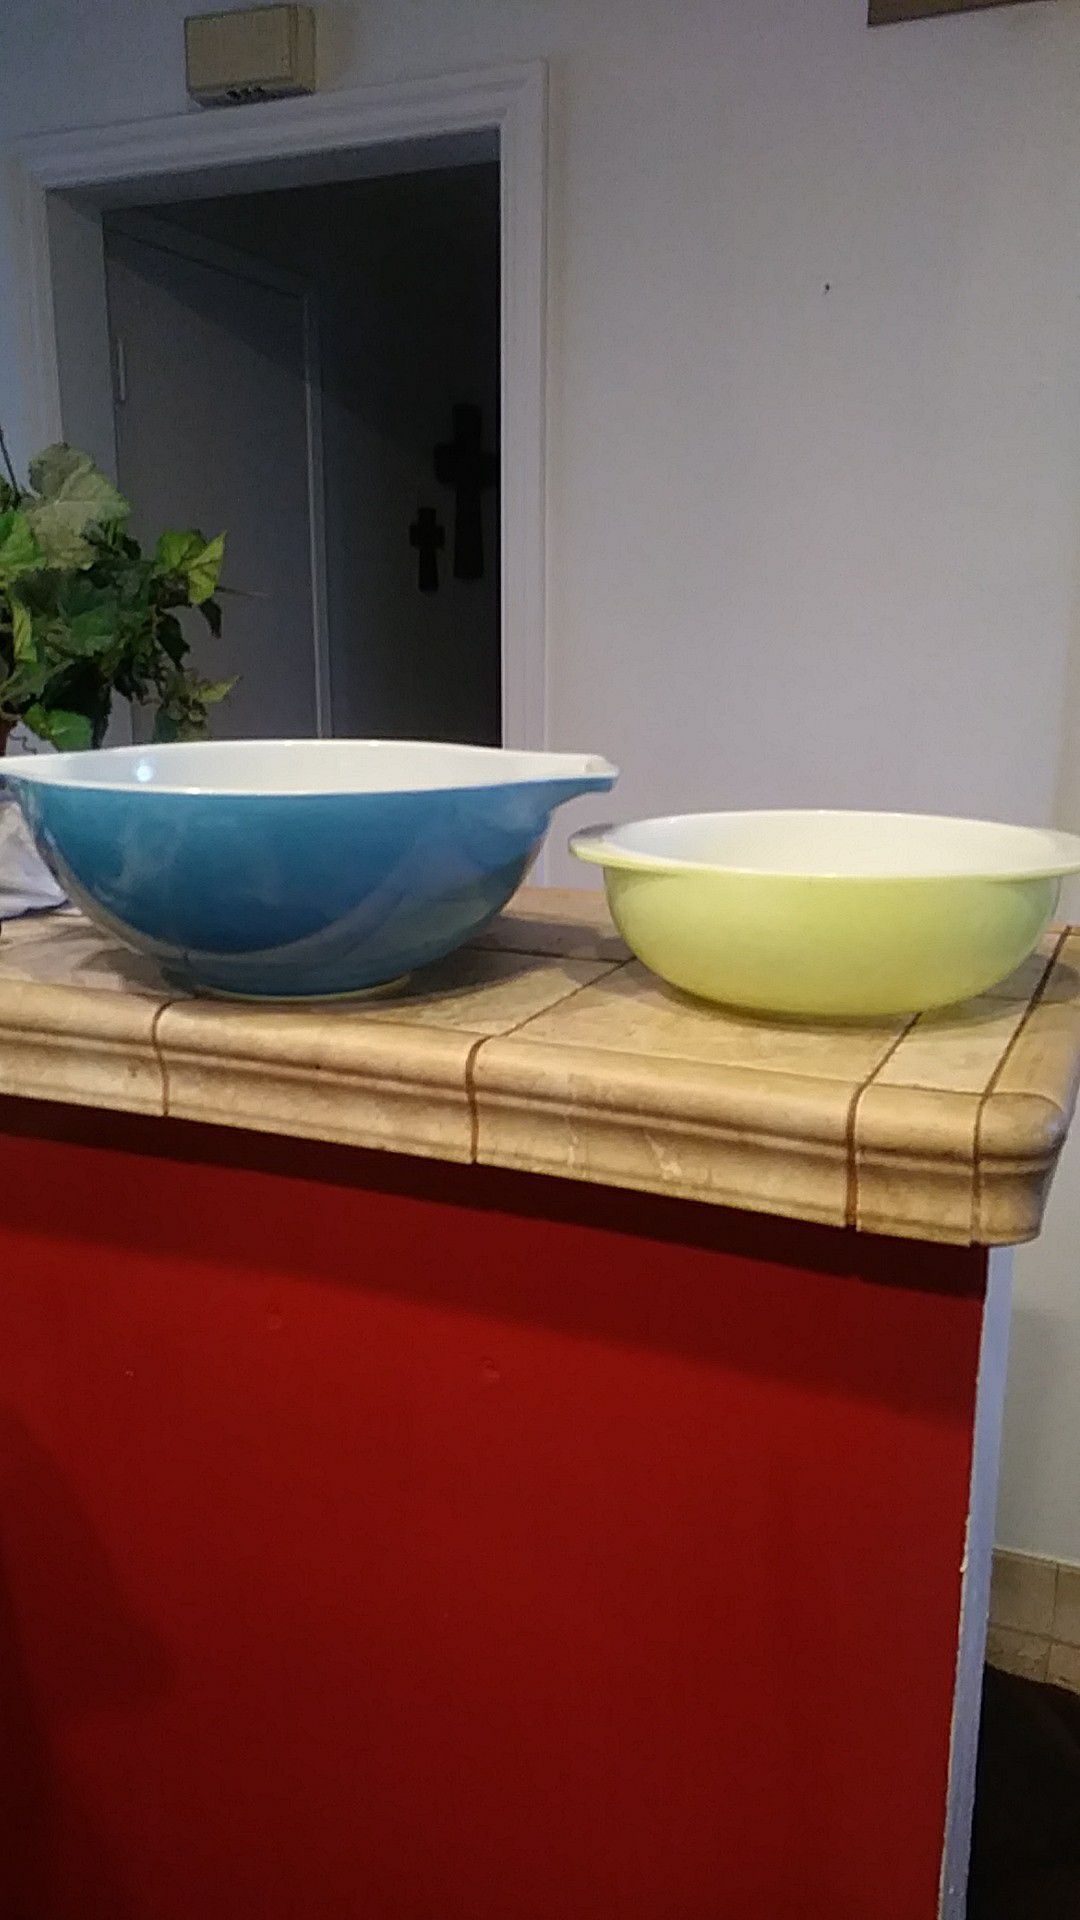 Pyrex bowls both for $15